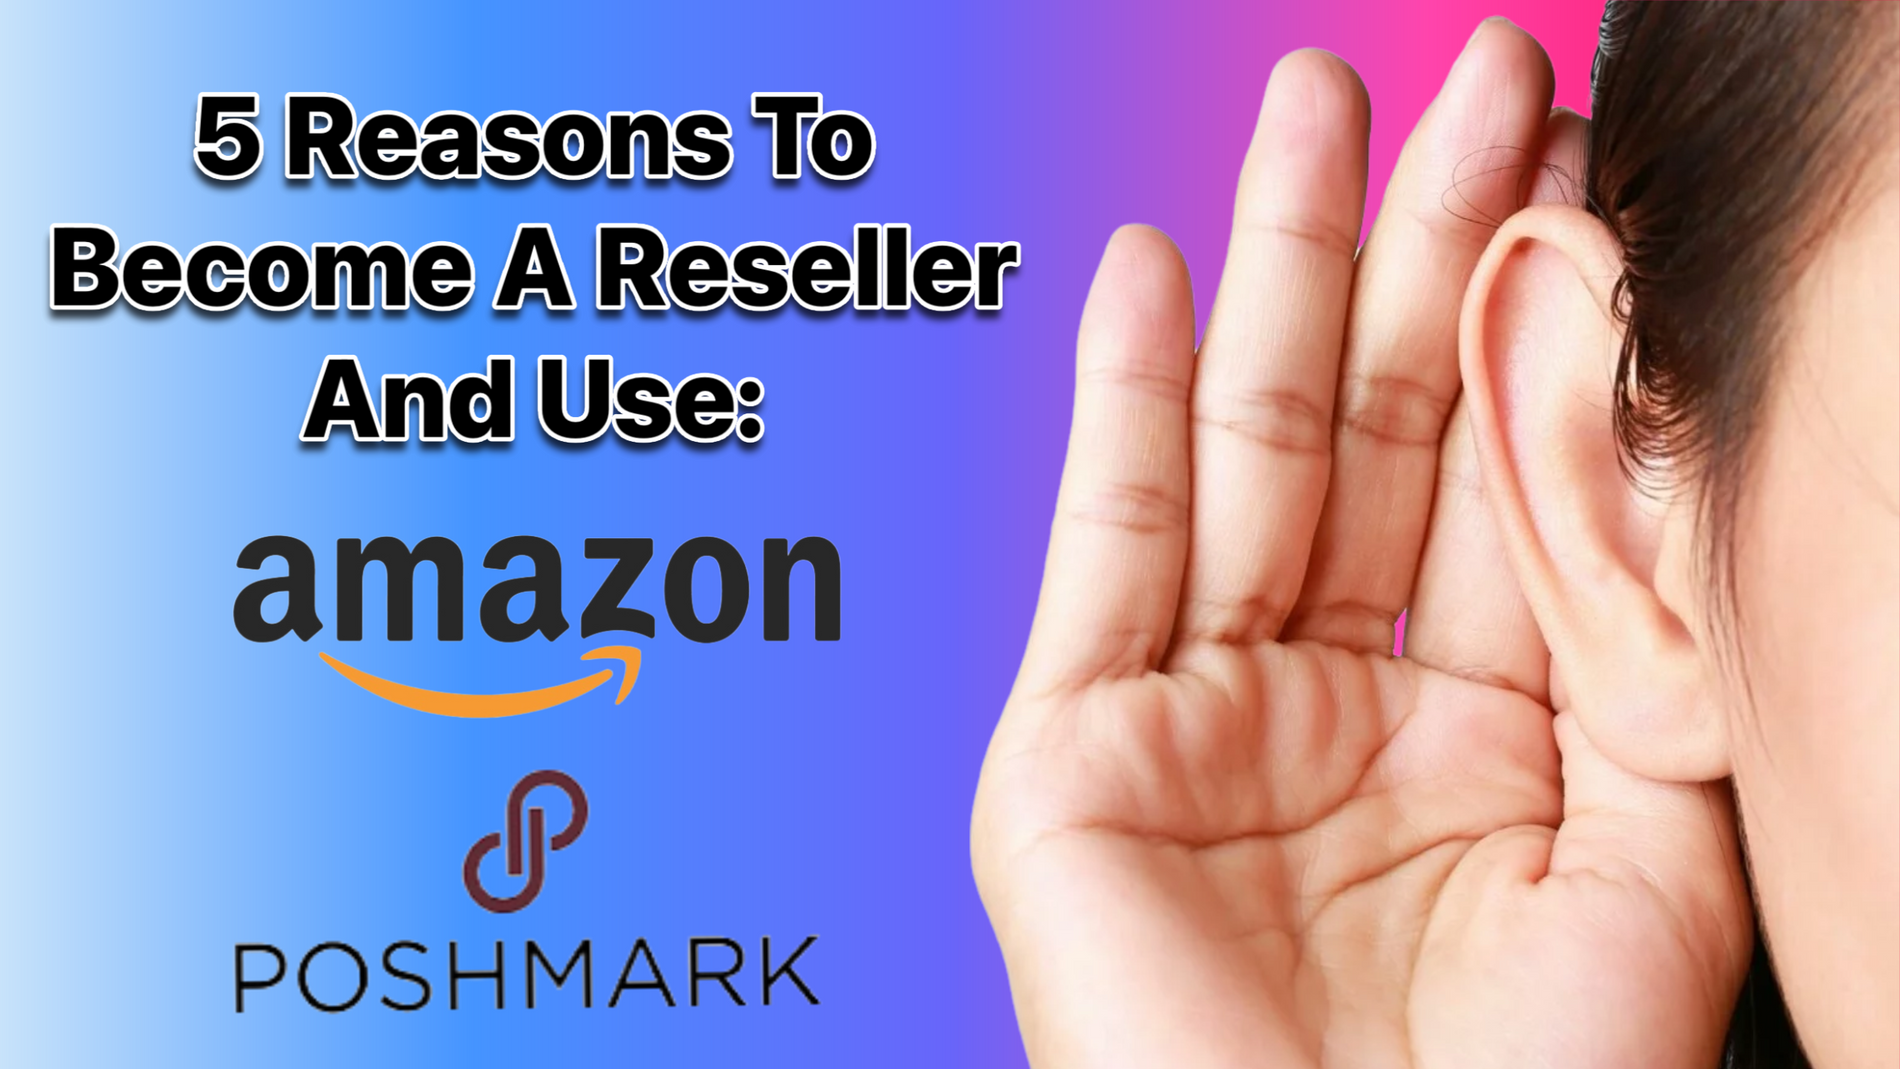 5 Reasons to Become a Reseller and Use Amazon and Poshmark as Your Platforms